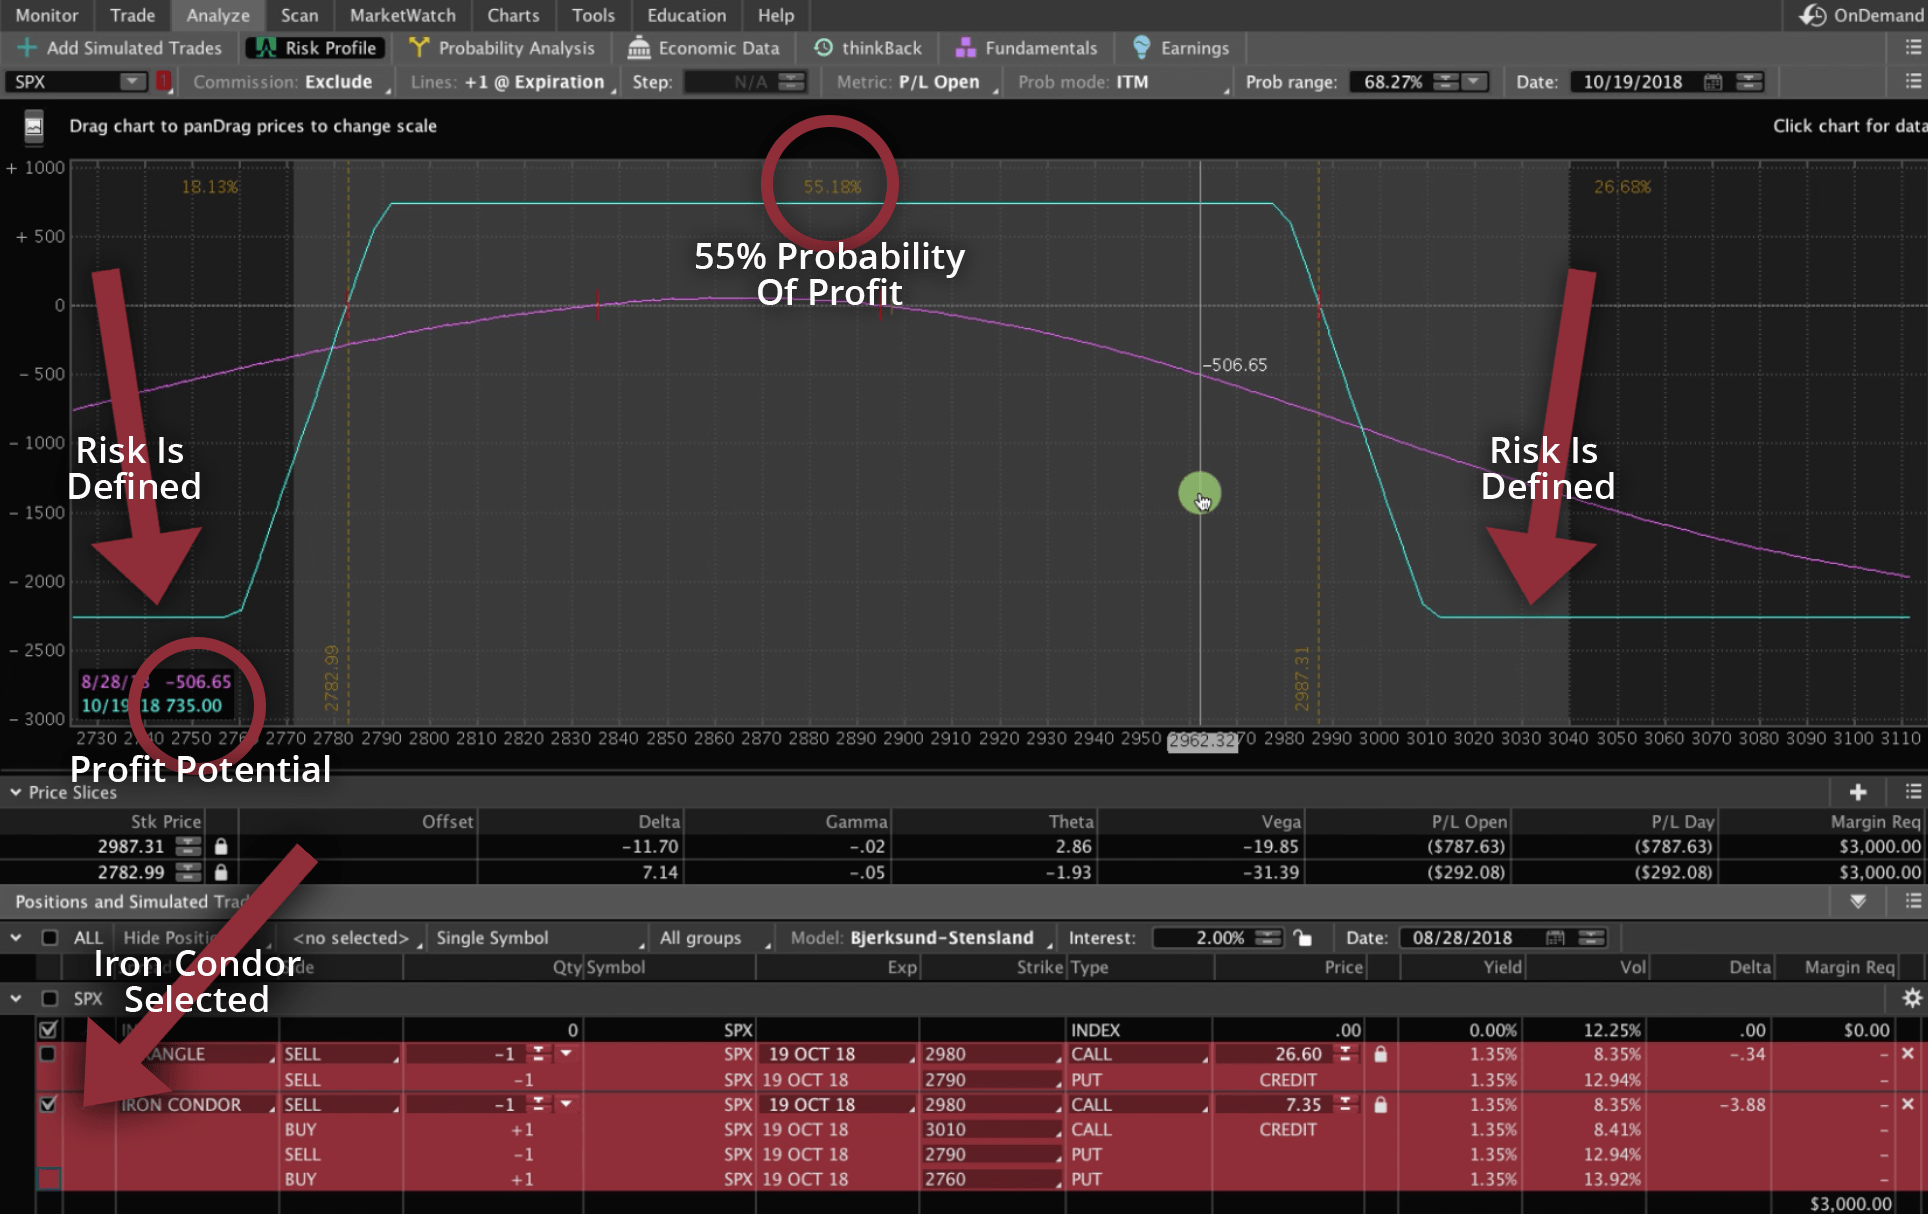 SPX Chart In Analyze Tab - Iron Condor selected